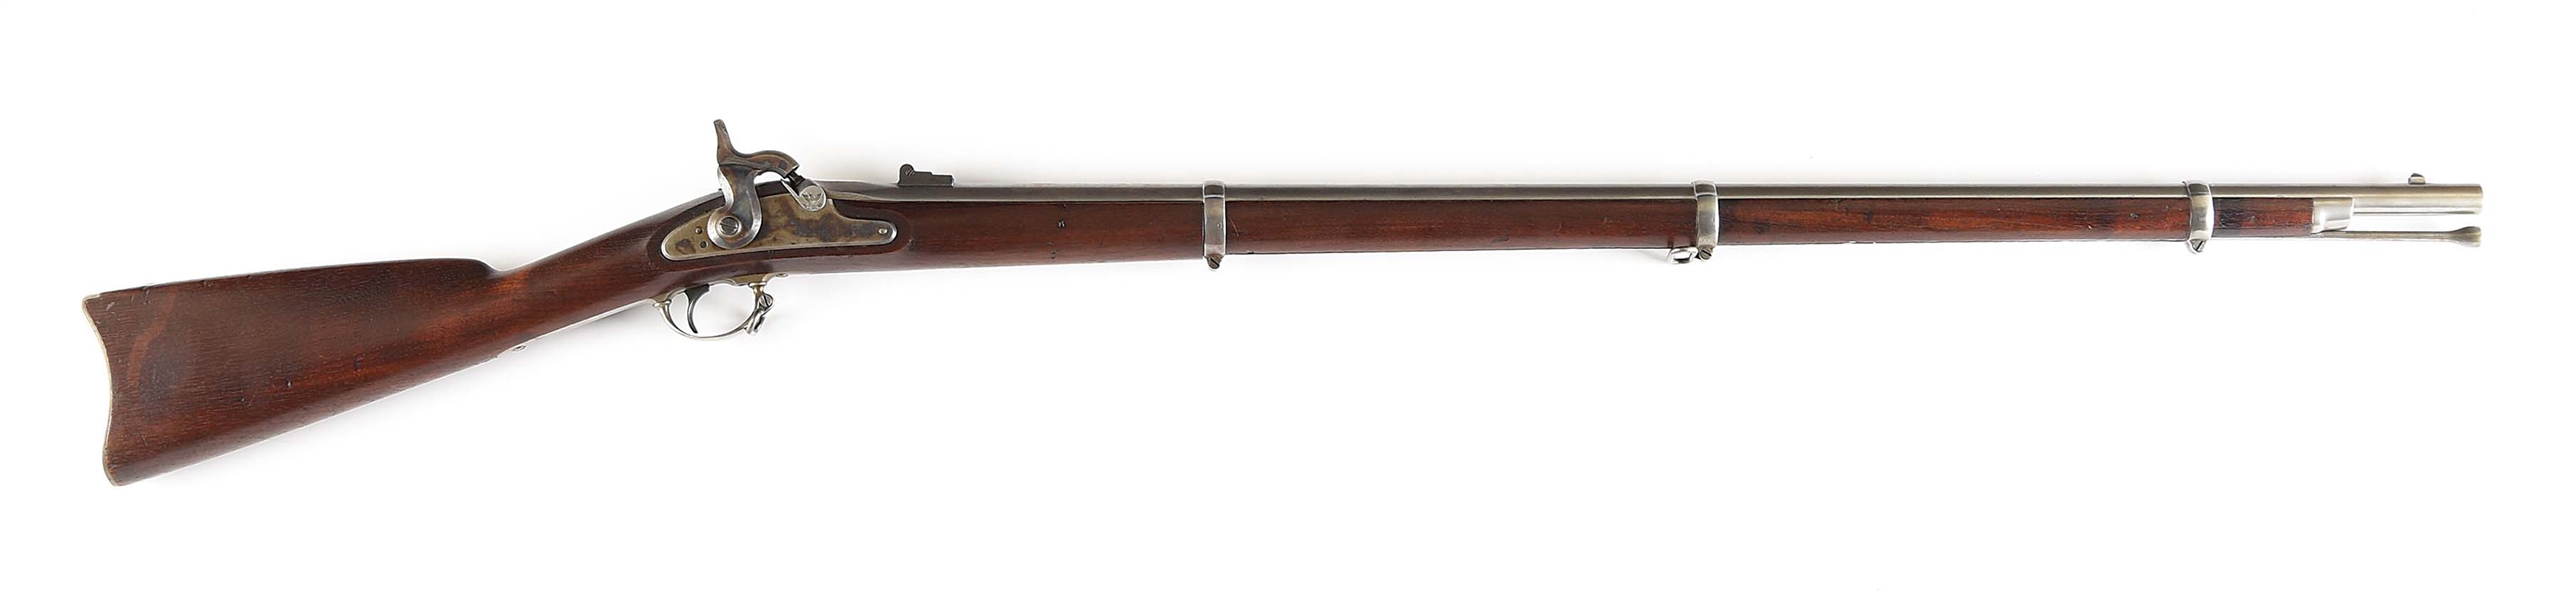 (A) SPRINGFIELD MODEL 1863 CIVIL WAR RIFLED MUSKET DATED 1863.